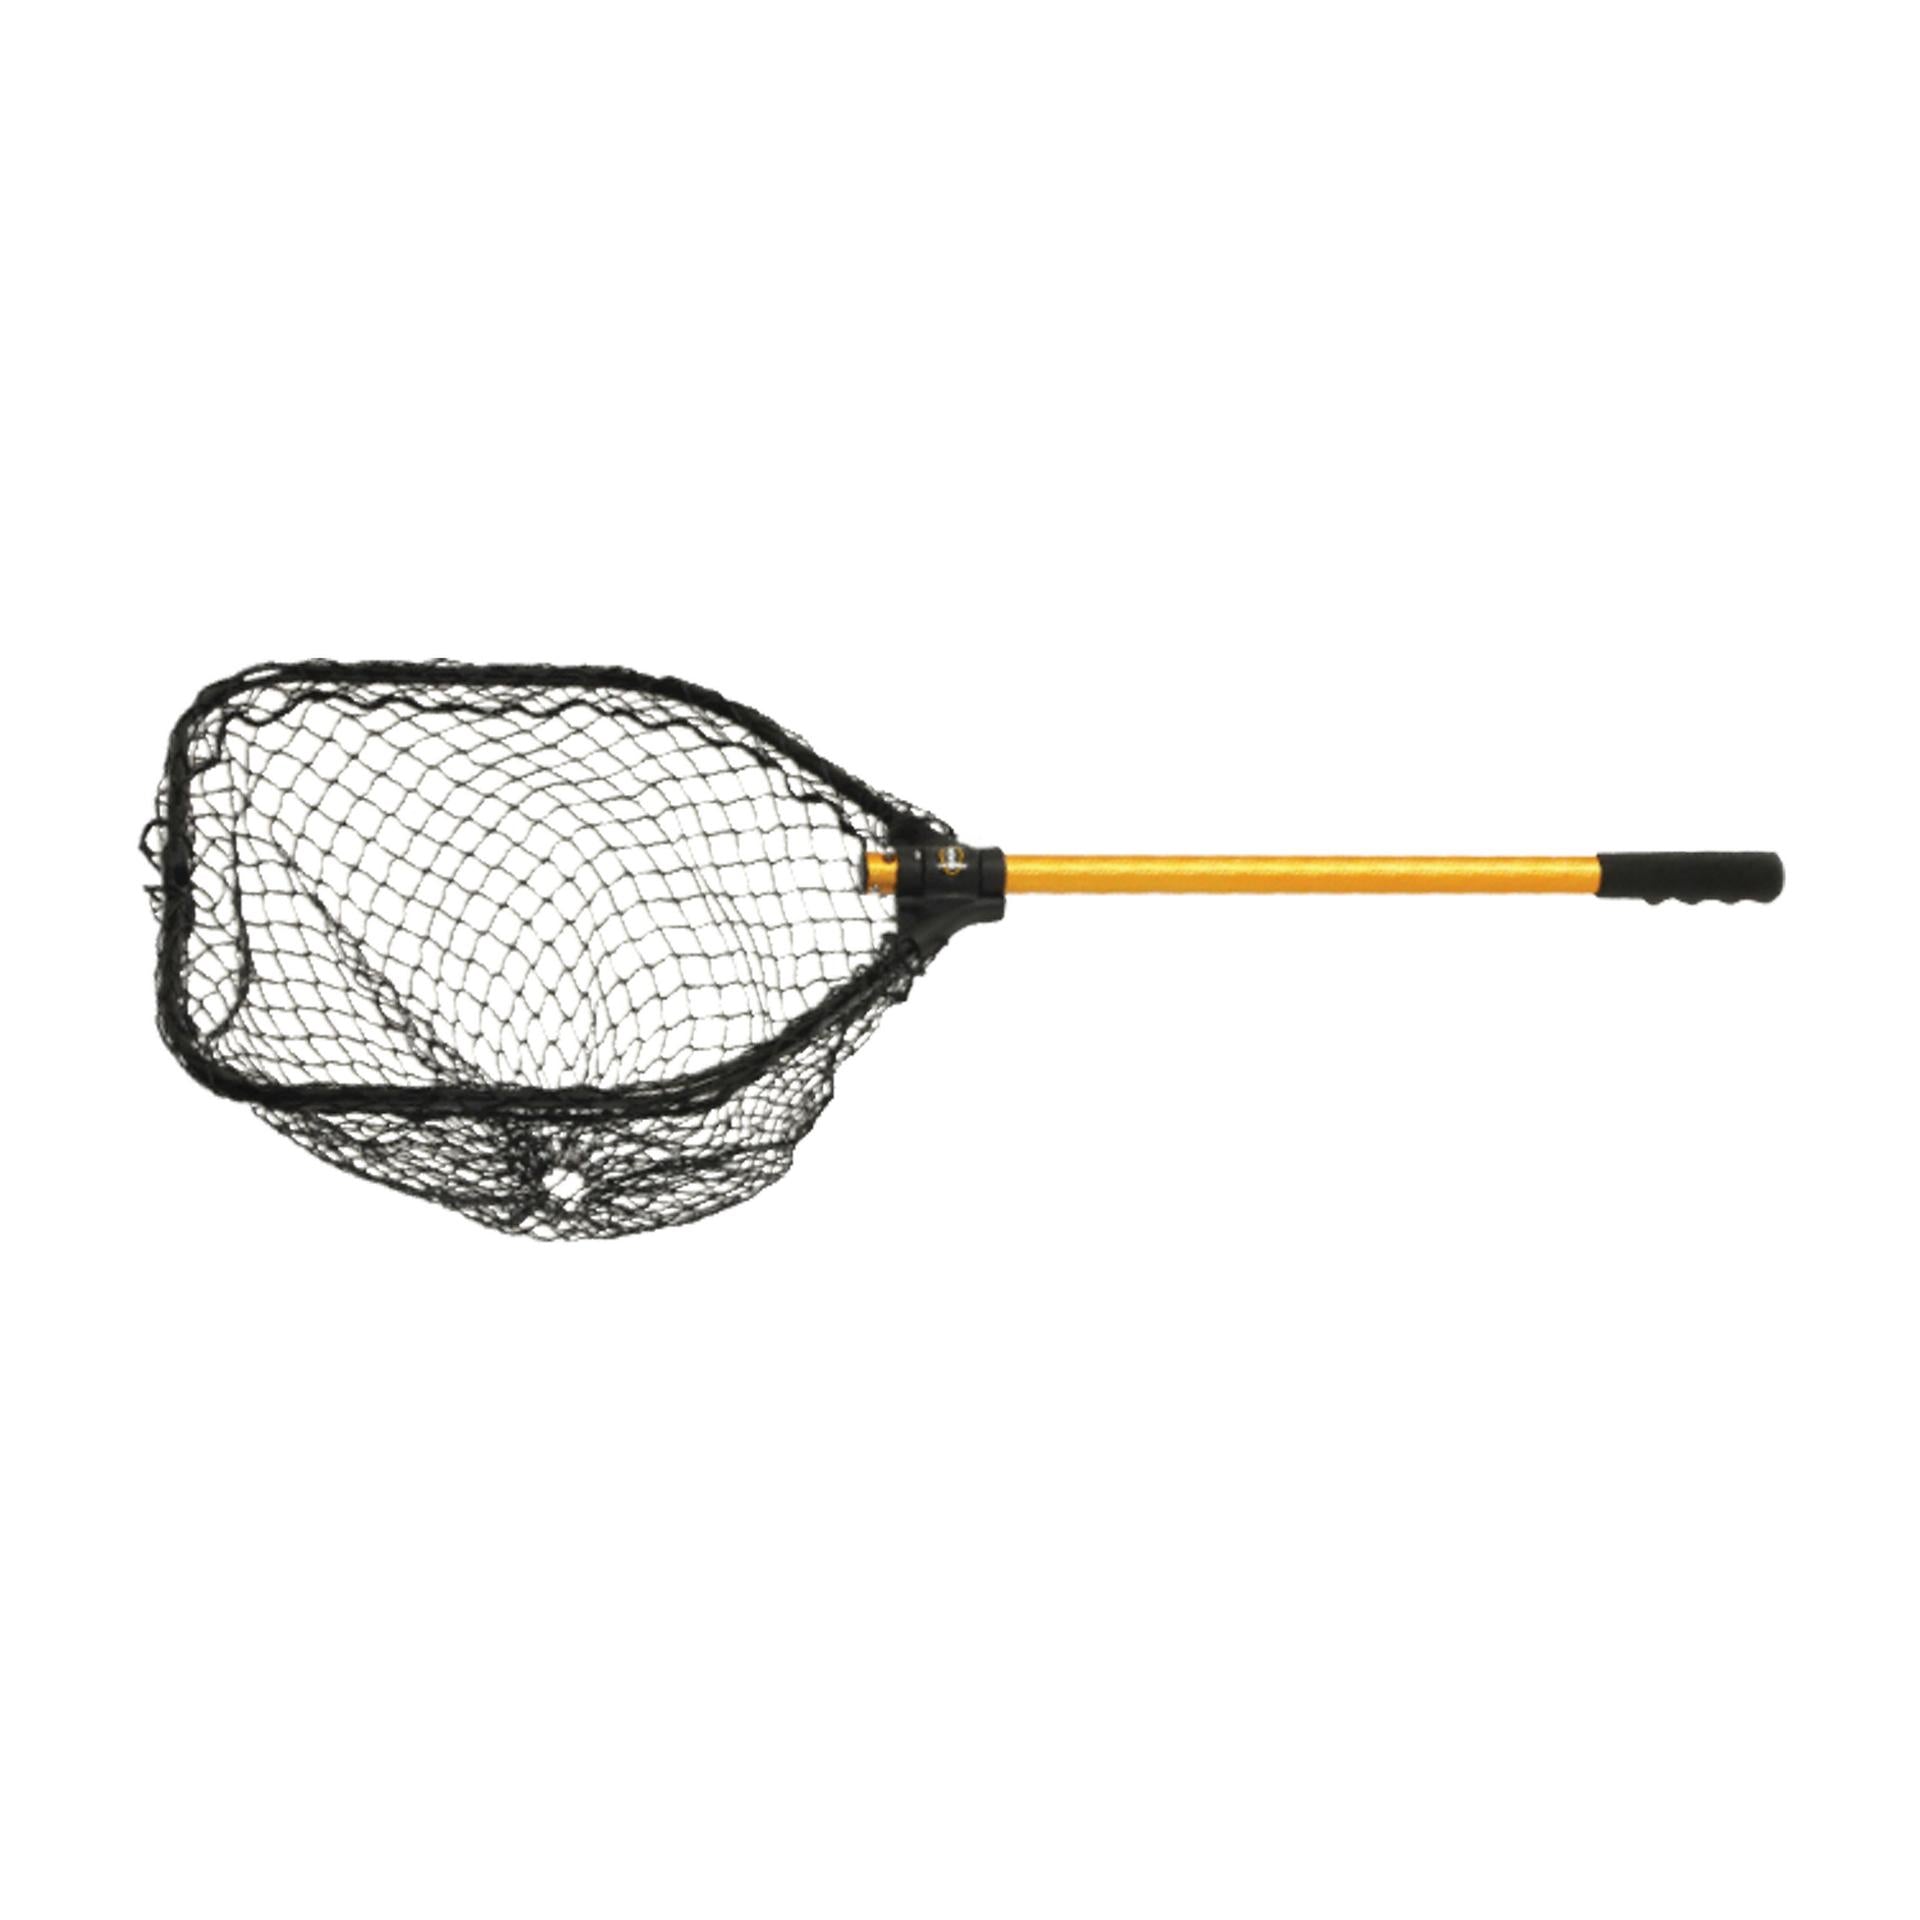 Tangle Free Power Stow® Net | FRABILL® 